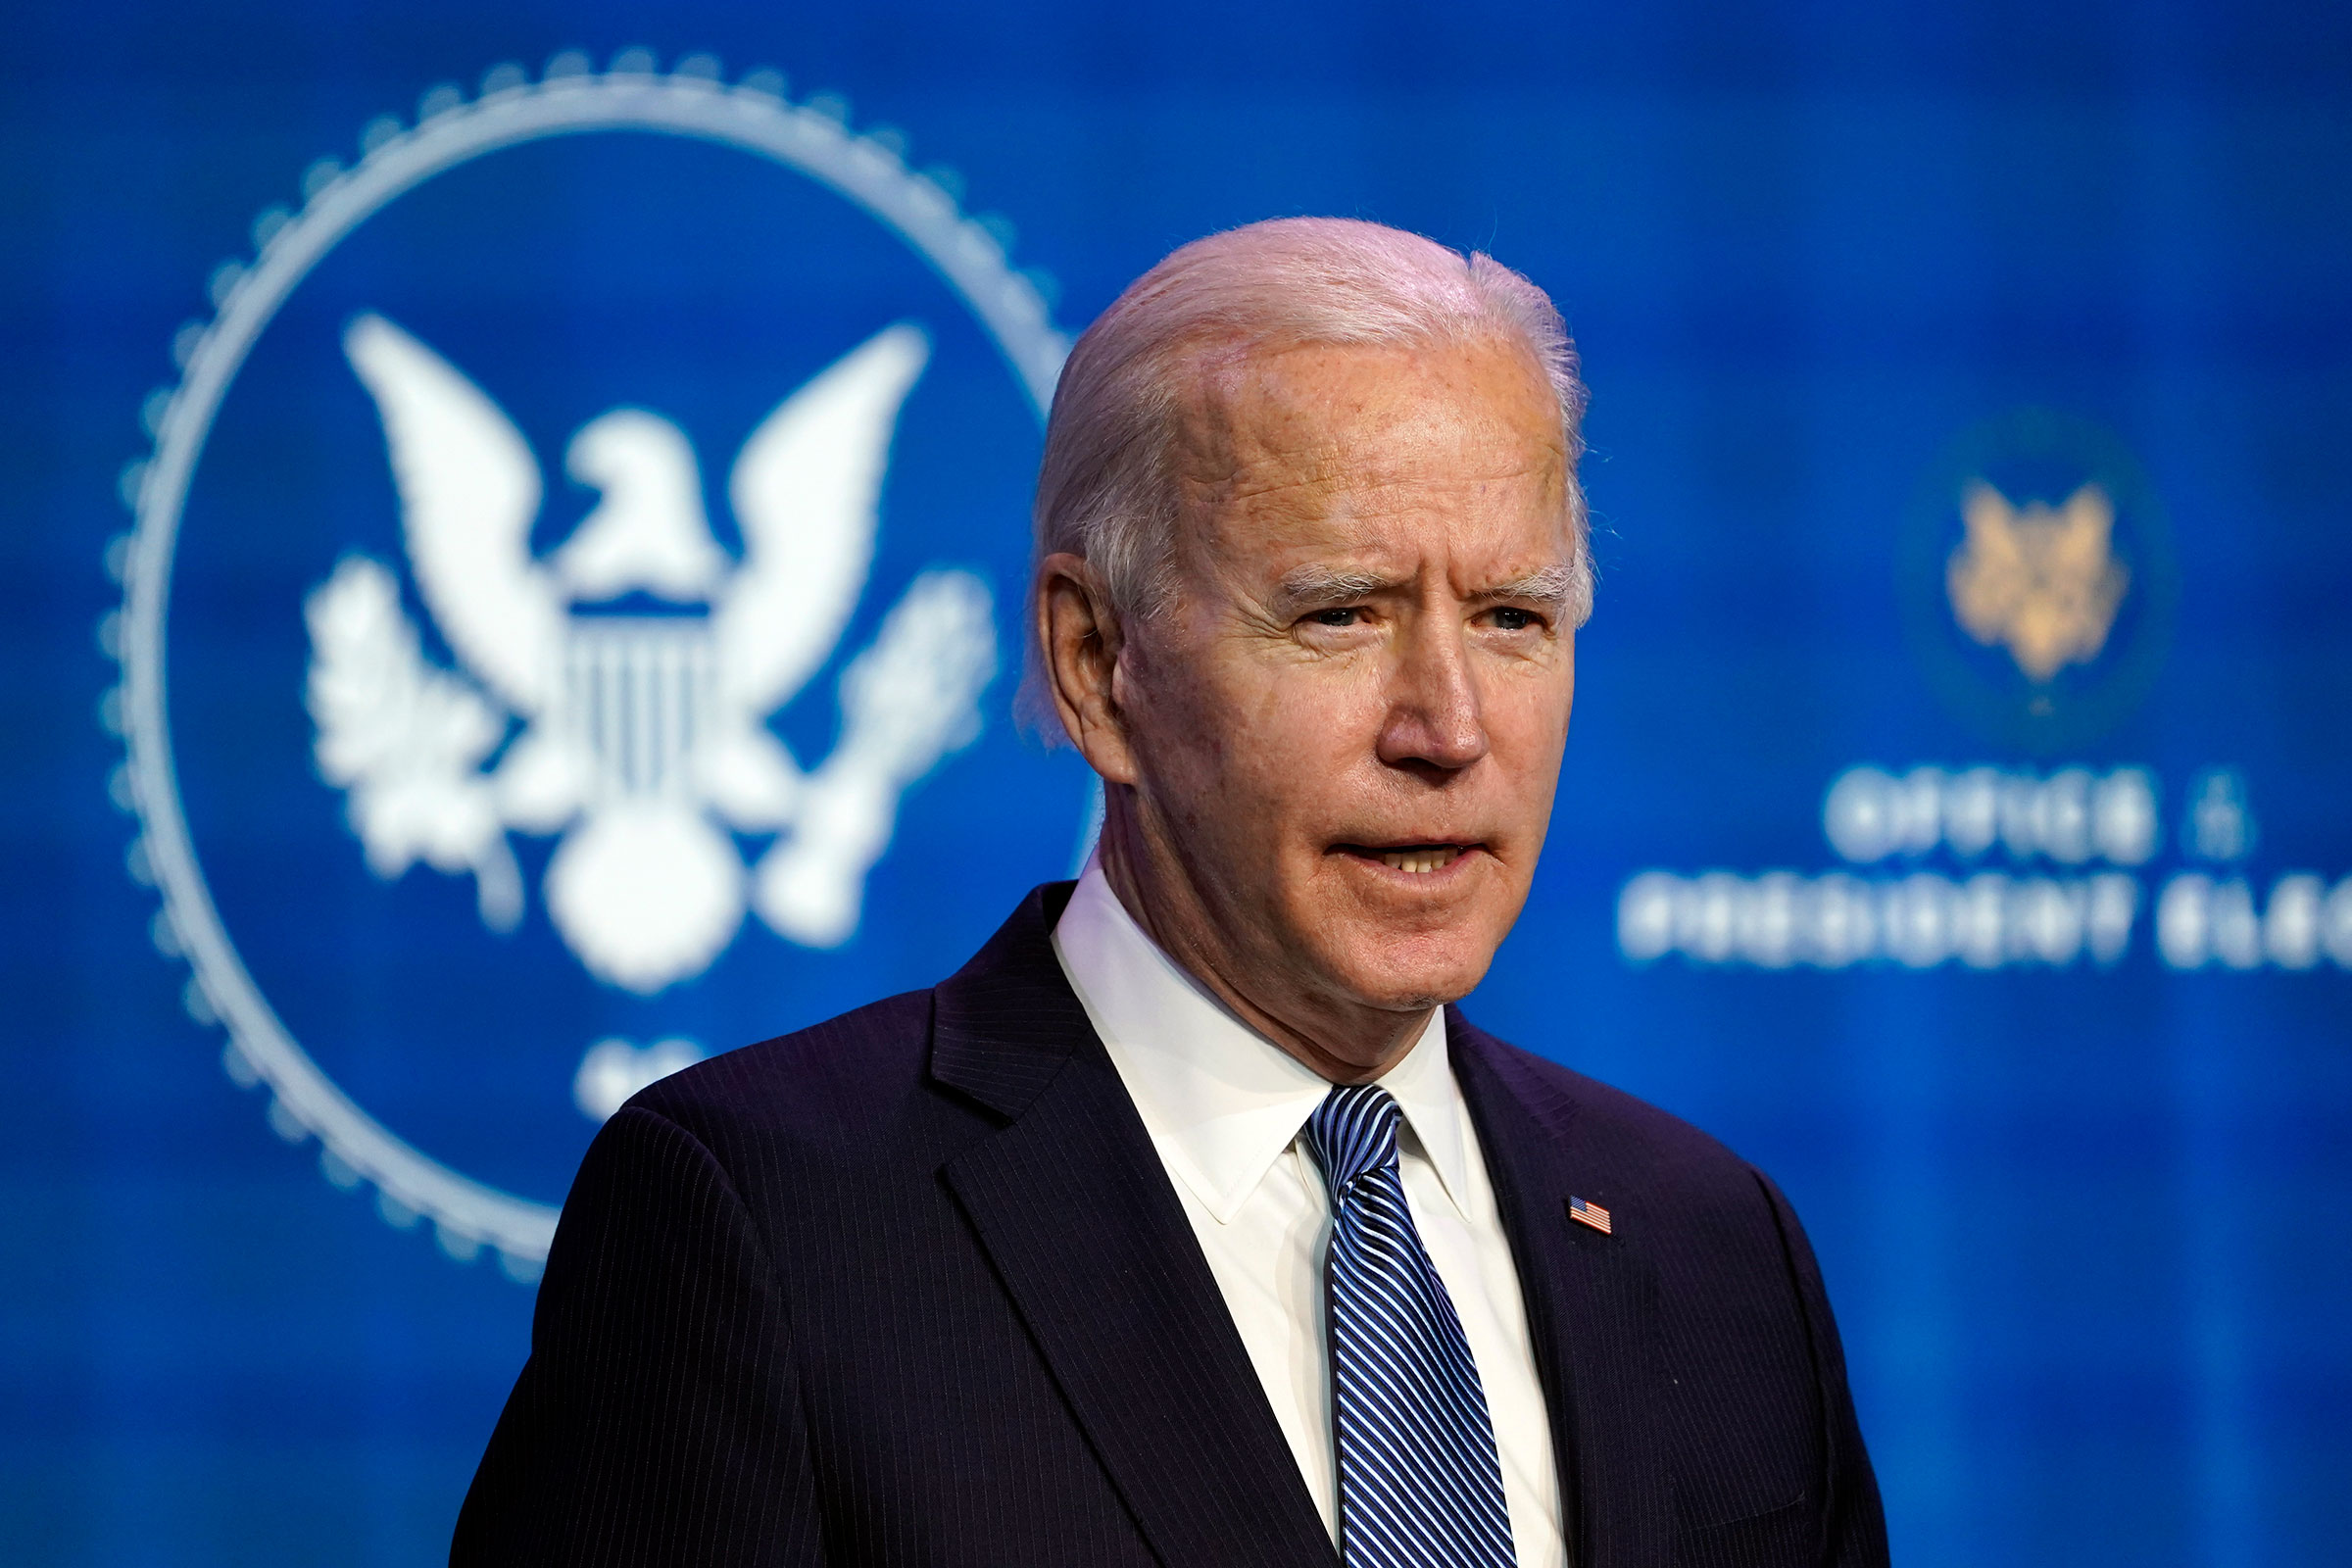 President-elect Joe Biden speaks during an event at The Queen theater on January 7 in Wilmington, Delaware.